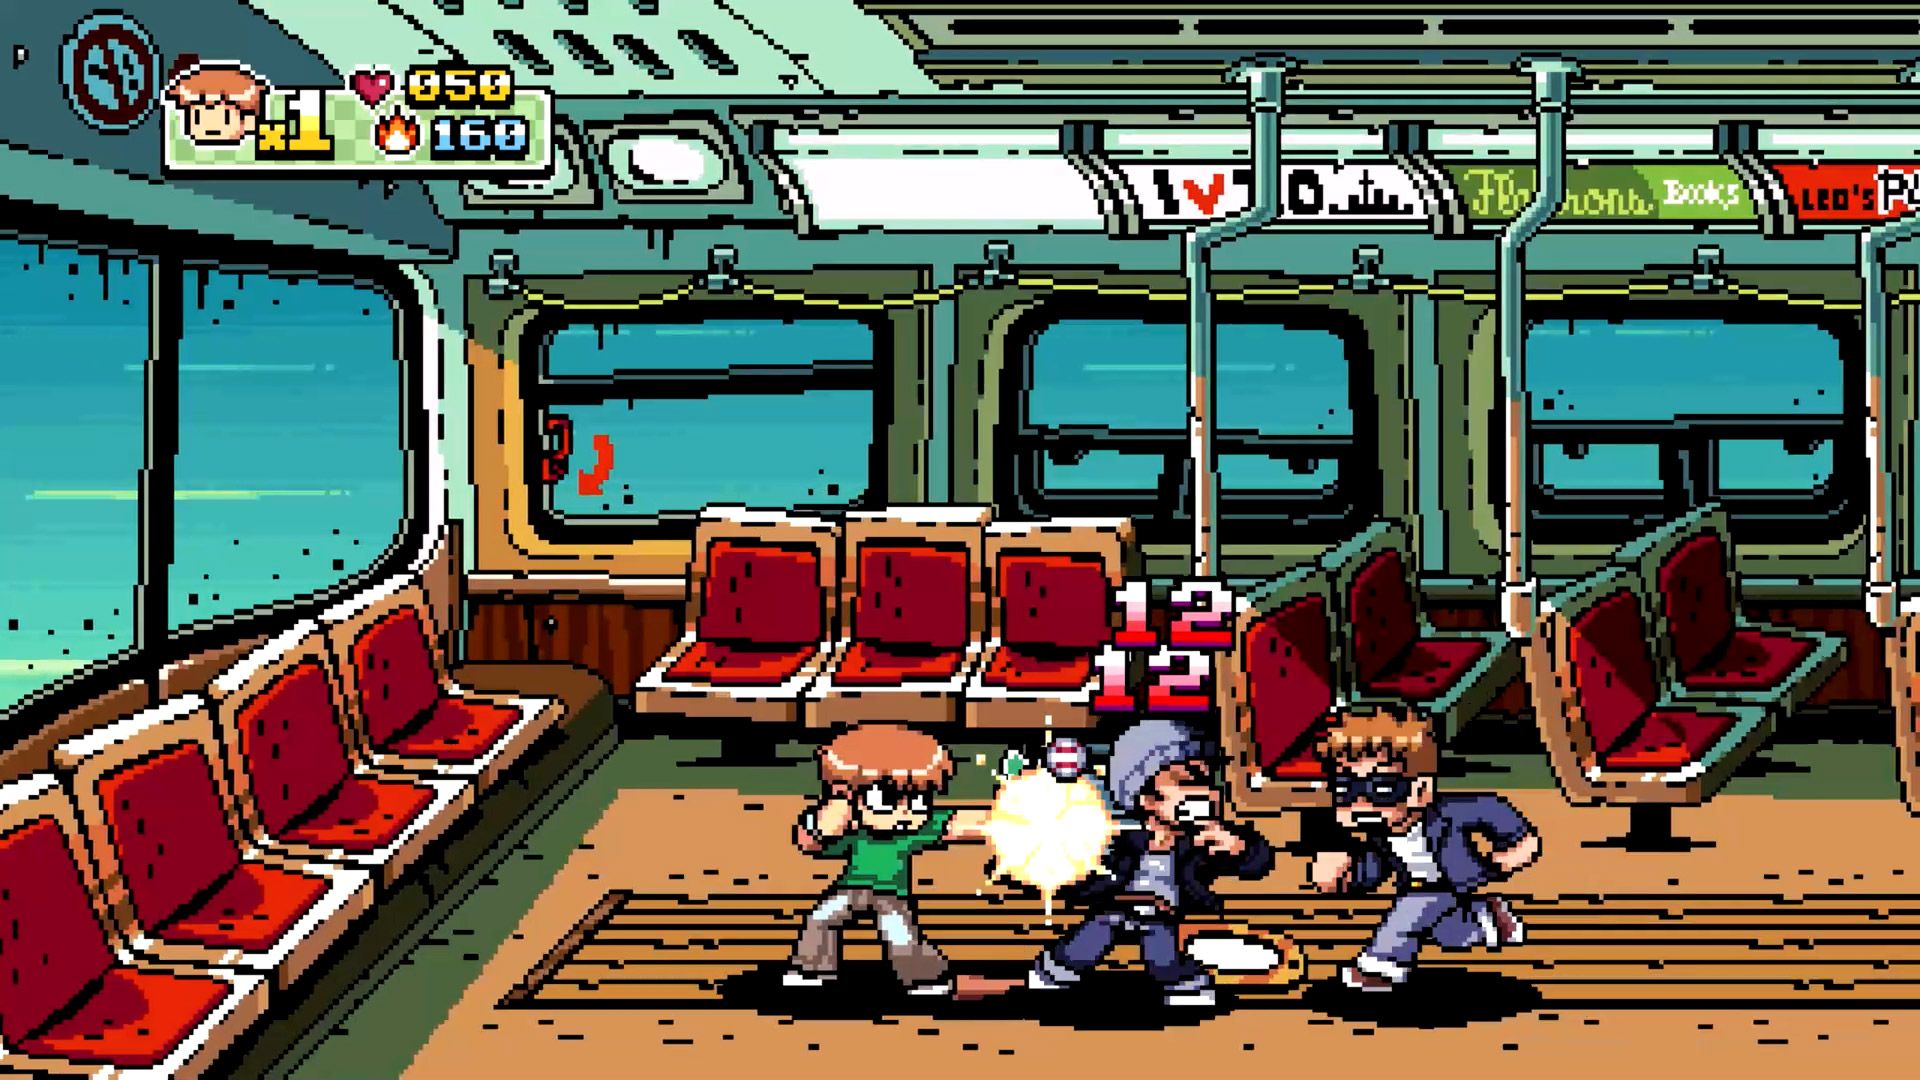 Scott Pilgrim vs. The World: The Game is coming back this holiday